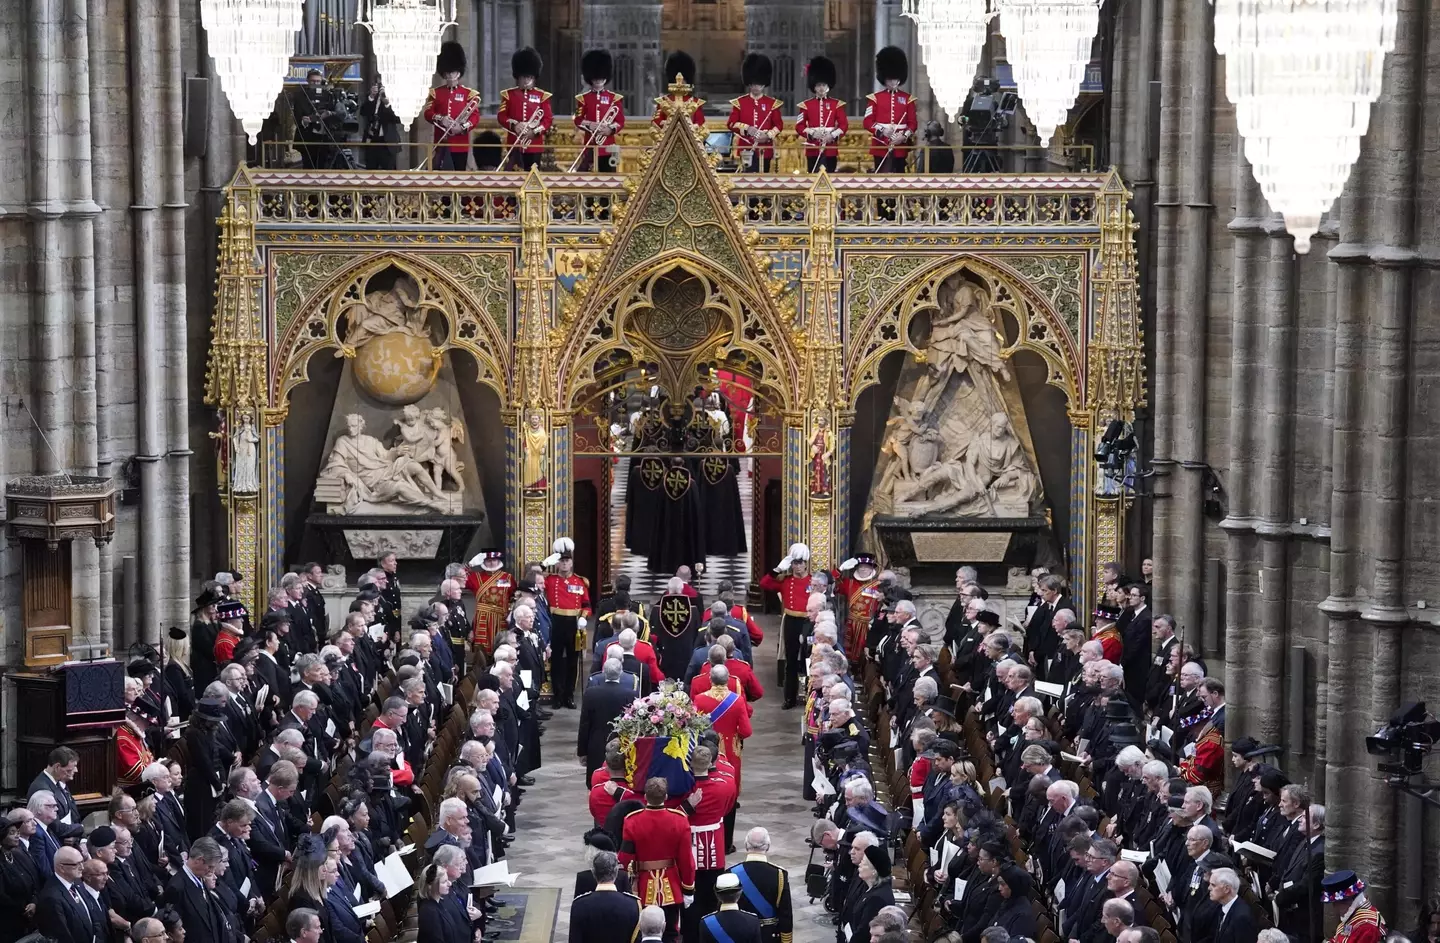 King Charles and members of the royal family following the Queen's remains.